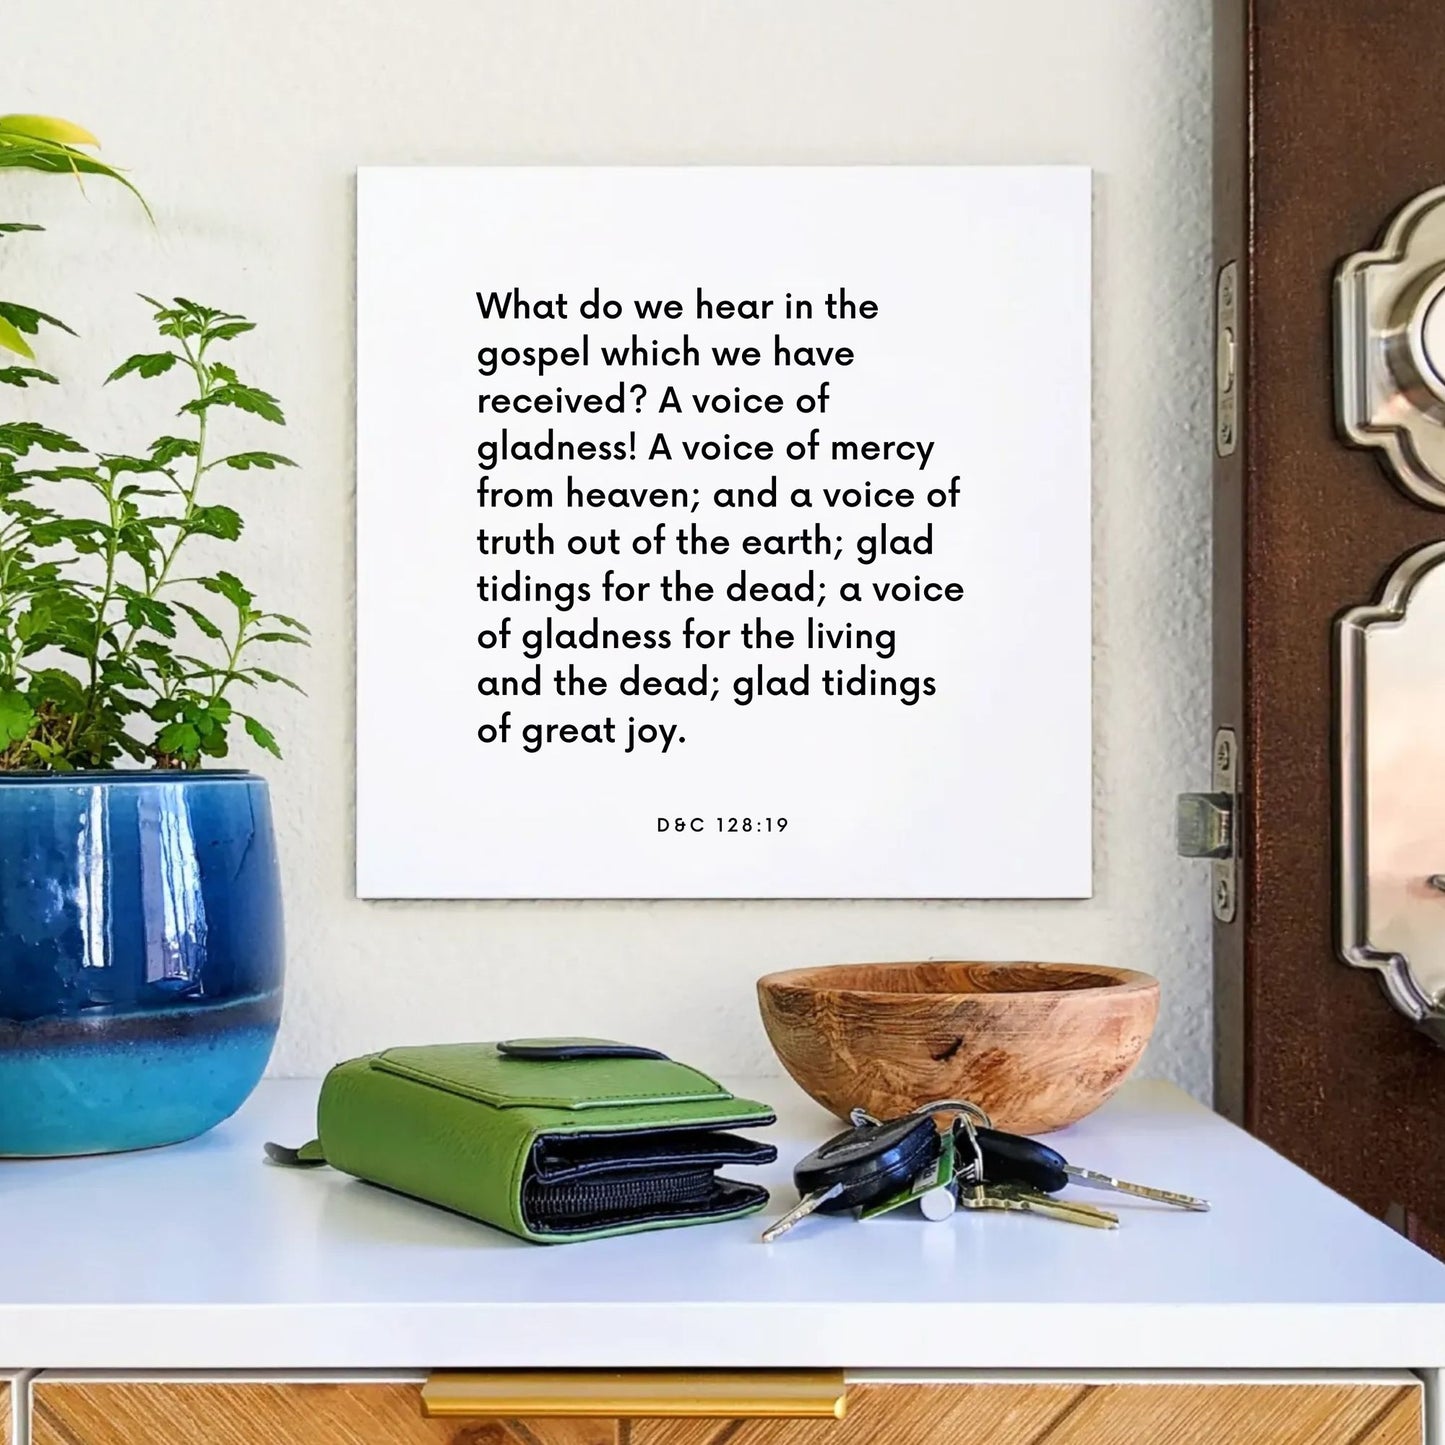 Entryway mouting of the scripture tile for D&C 128:19 - "What do we hear in the gospel which we have received?"